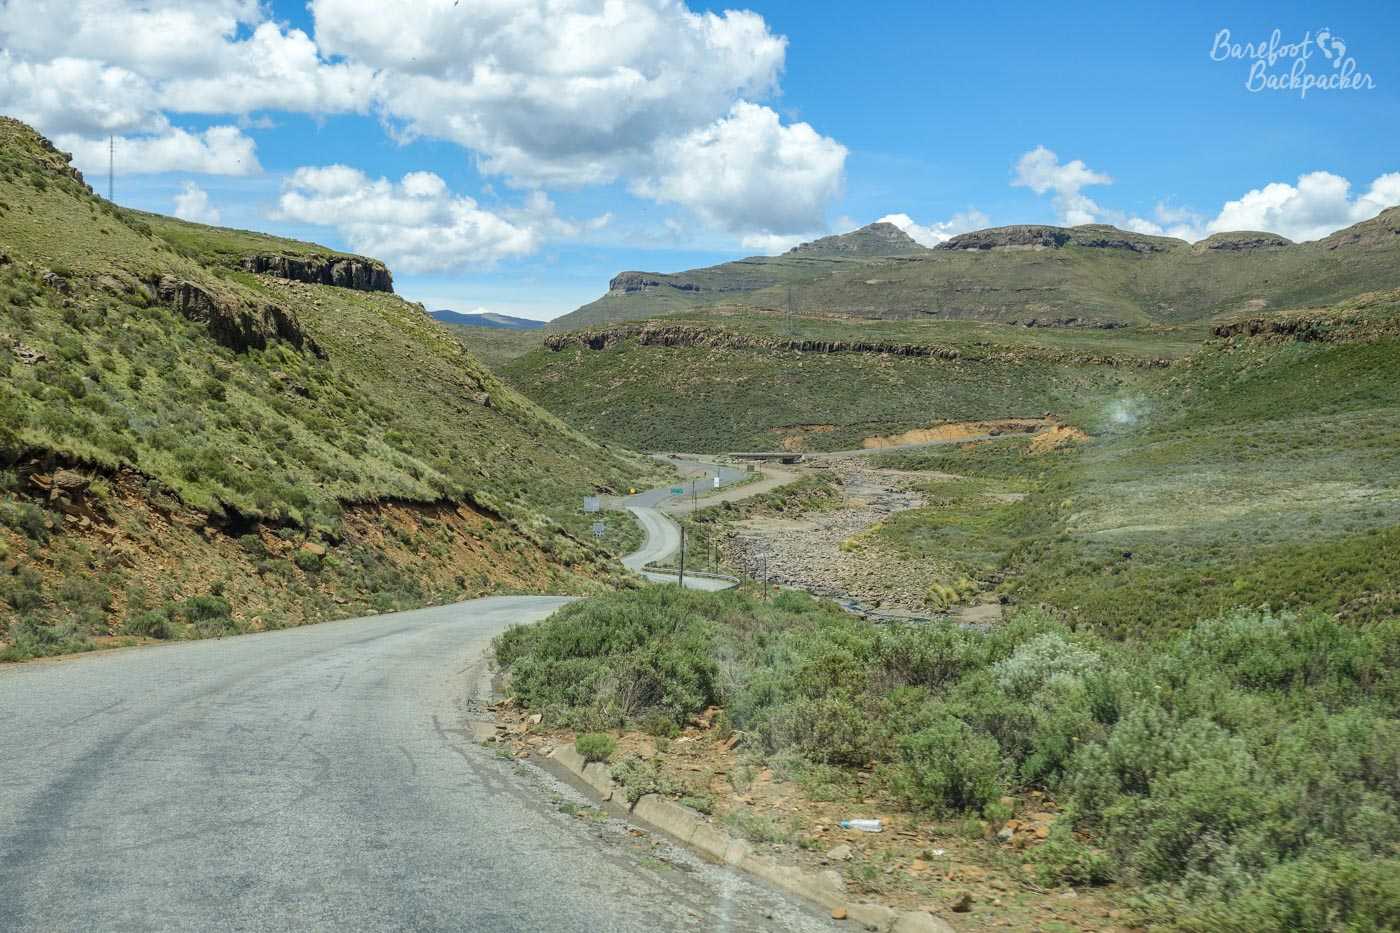 Scenery on the road from Maseru to Mokhotlong, Lesotho, taken from inside the minibus